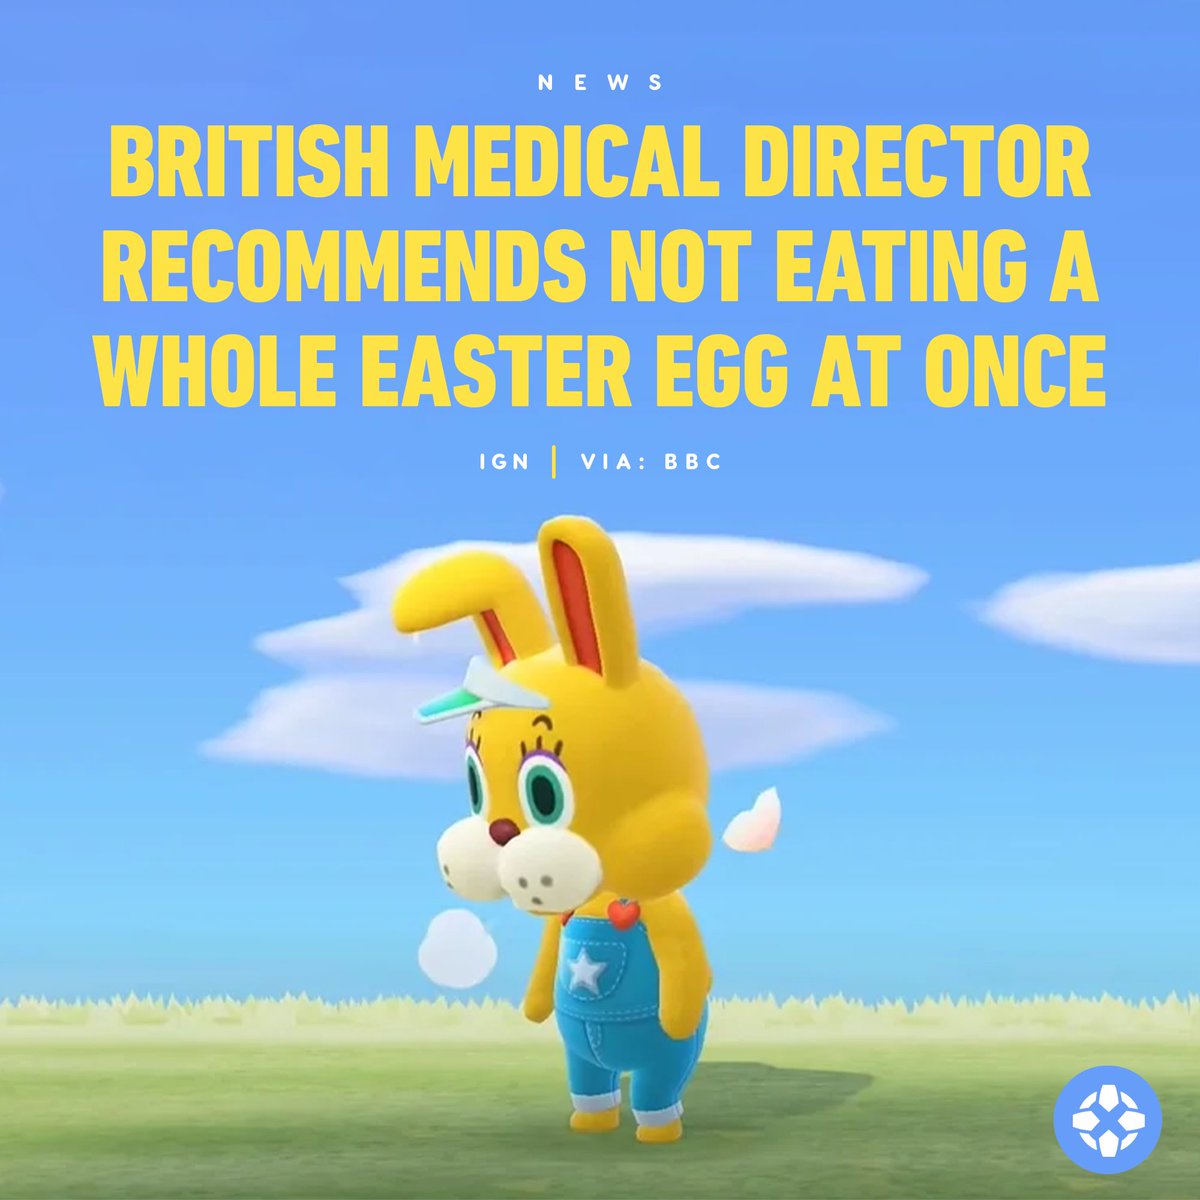 'Many of us do not realise an average Easter egg contains about three-quarters of an adult's recommended daily calorie intake' wrote NHS Suffolk and North East Essex's Dr Kelso, adding: 'Please don't overdo it.' news.sky.com/story/do-not-e…